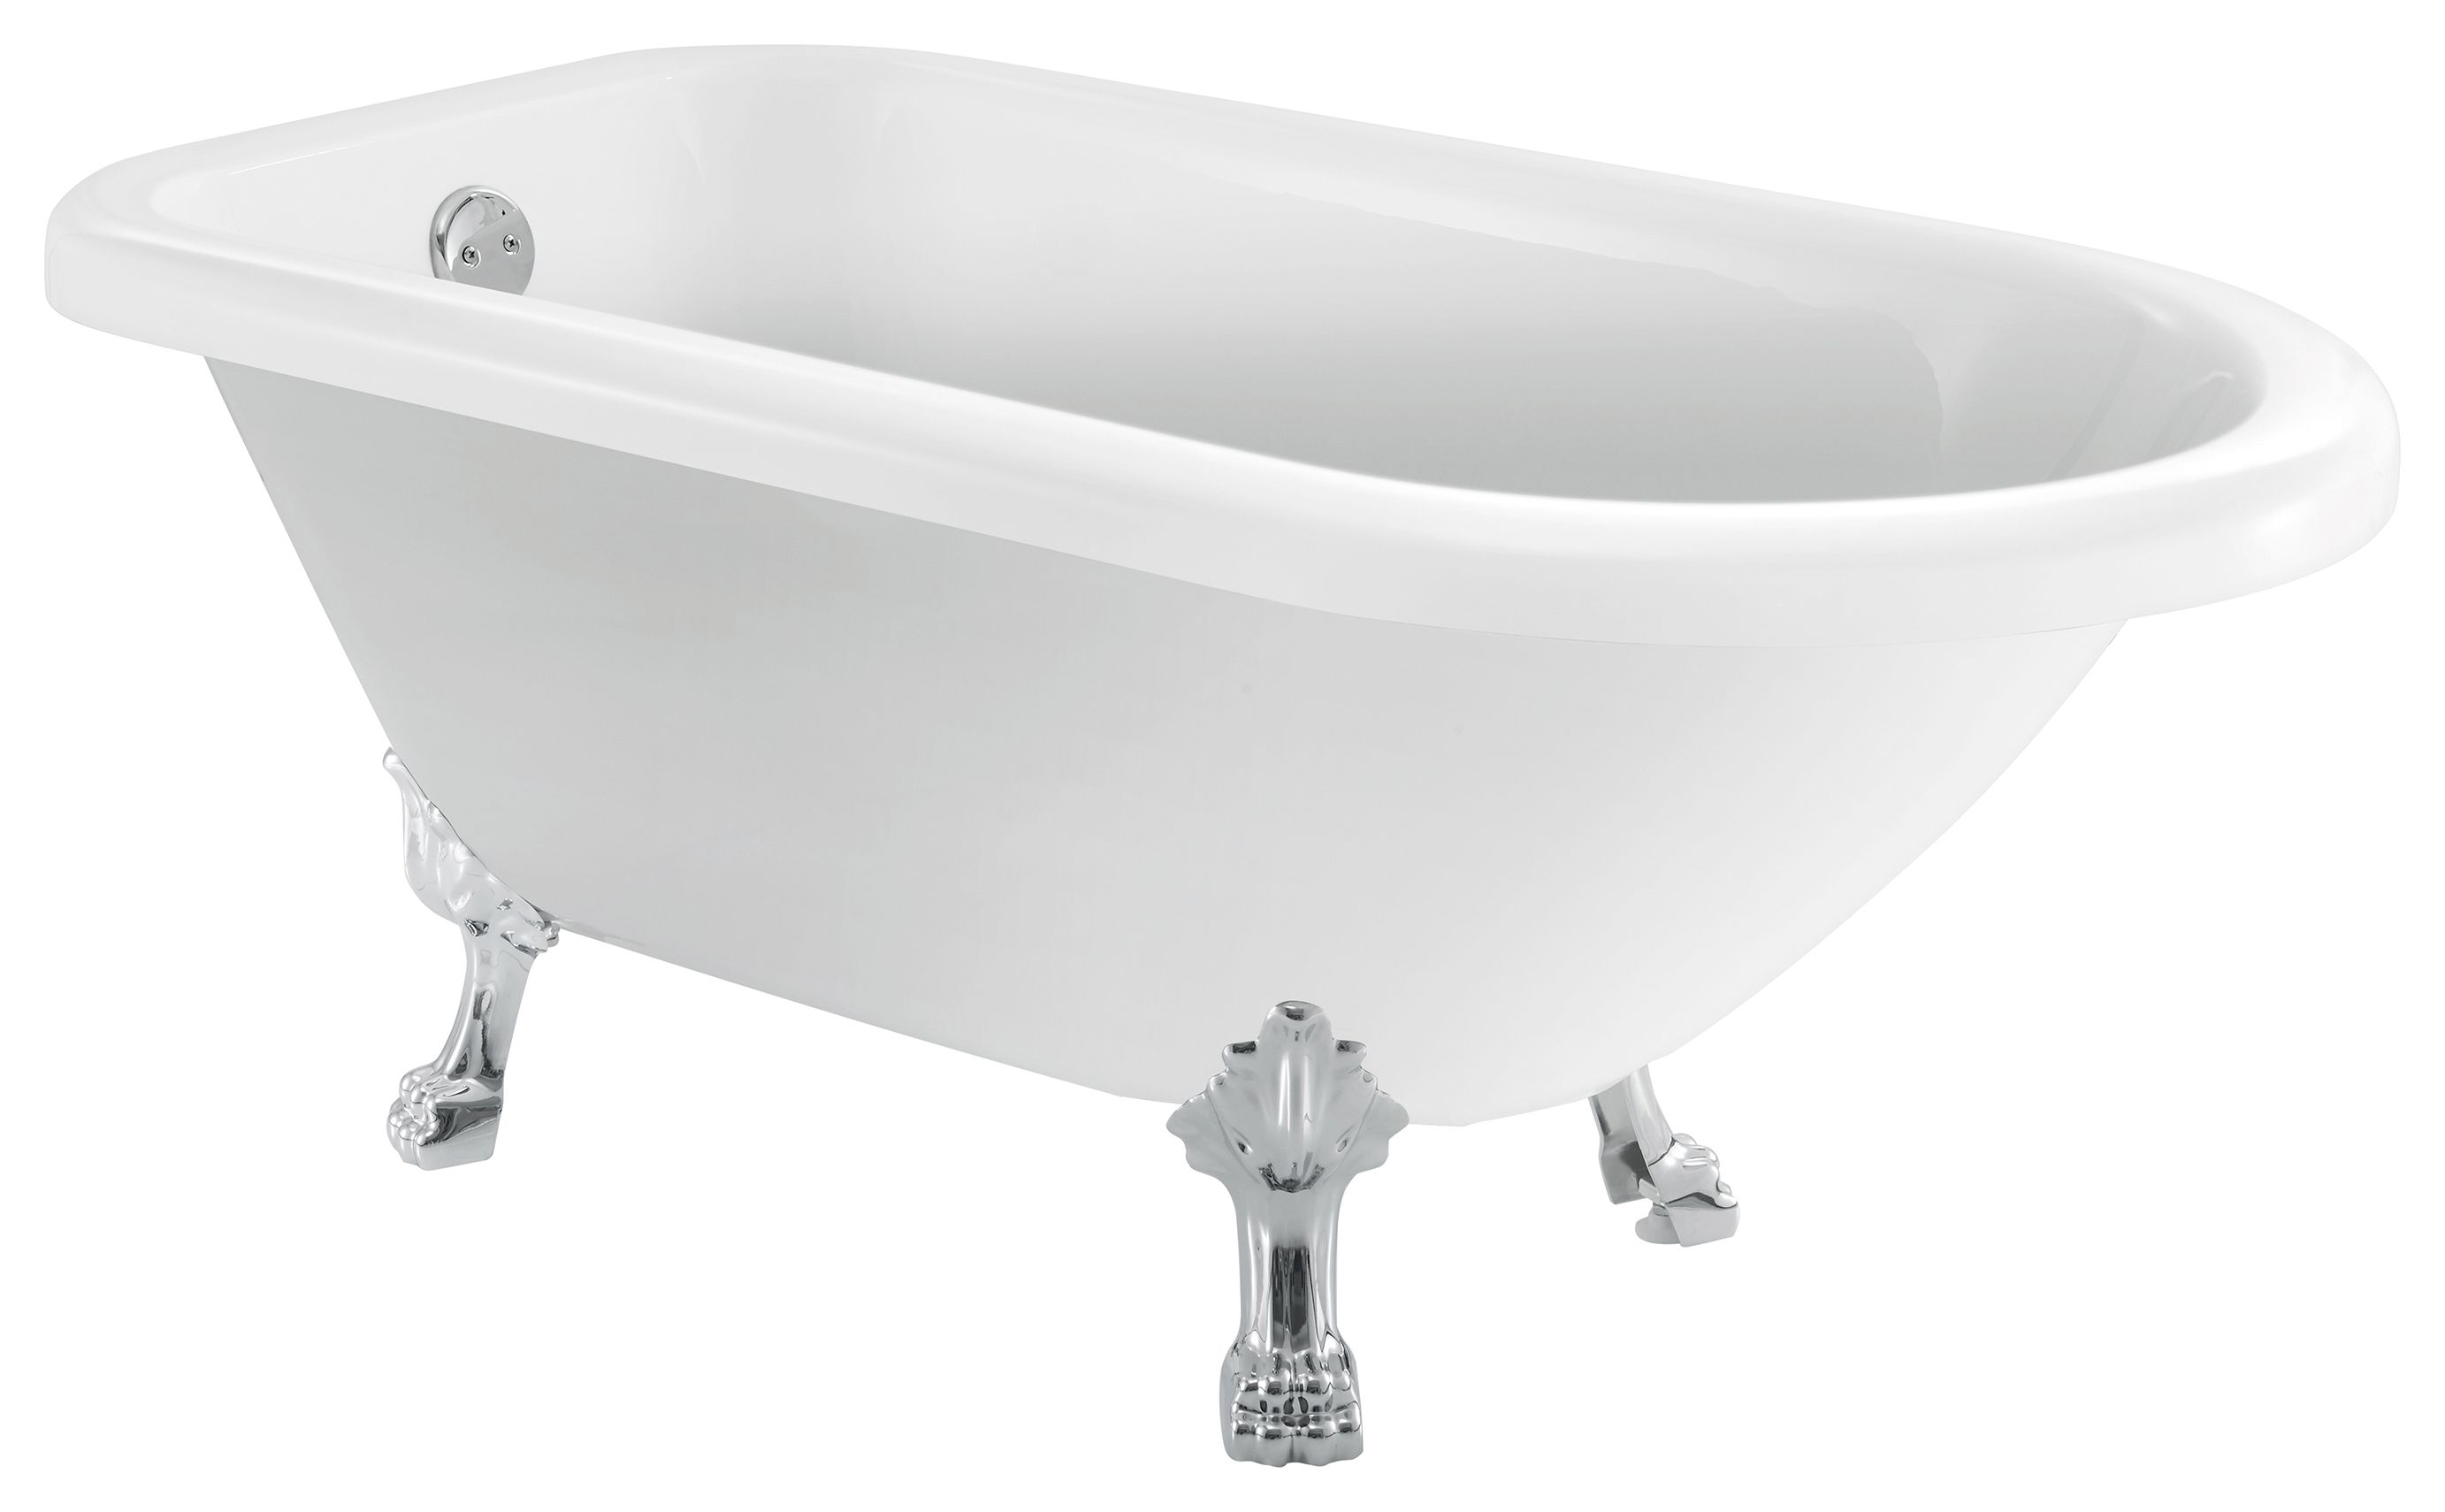 Wickes Warwick Freestanding Traditional Single Ended Roll Top Bath - 1570 x 635mm